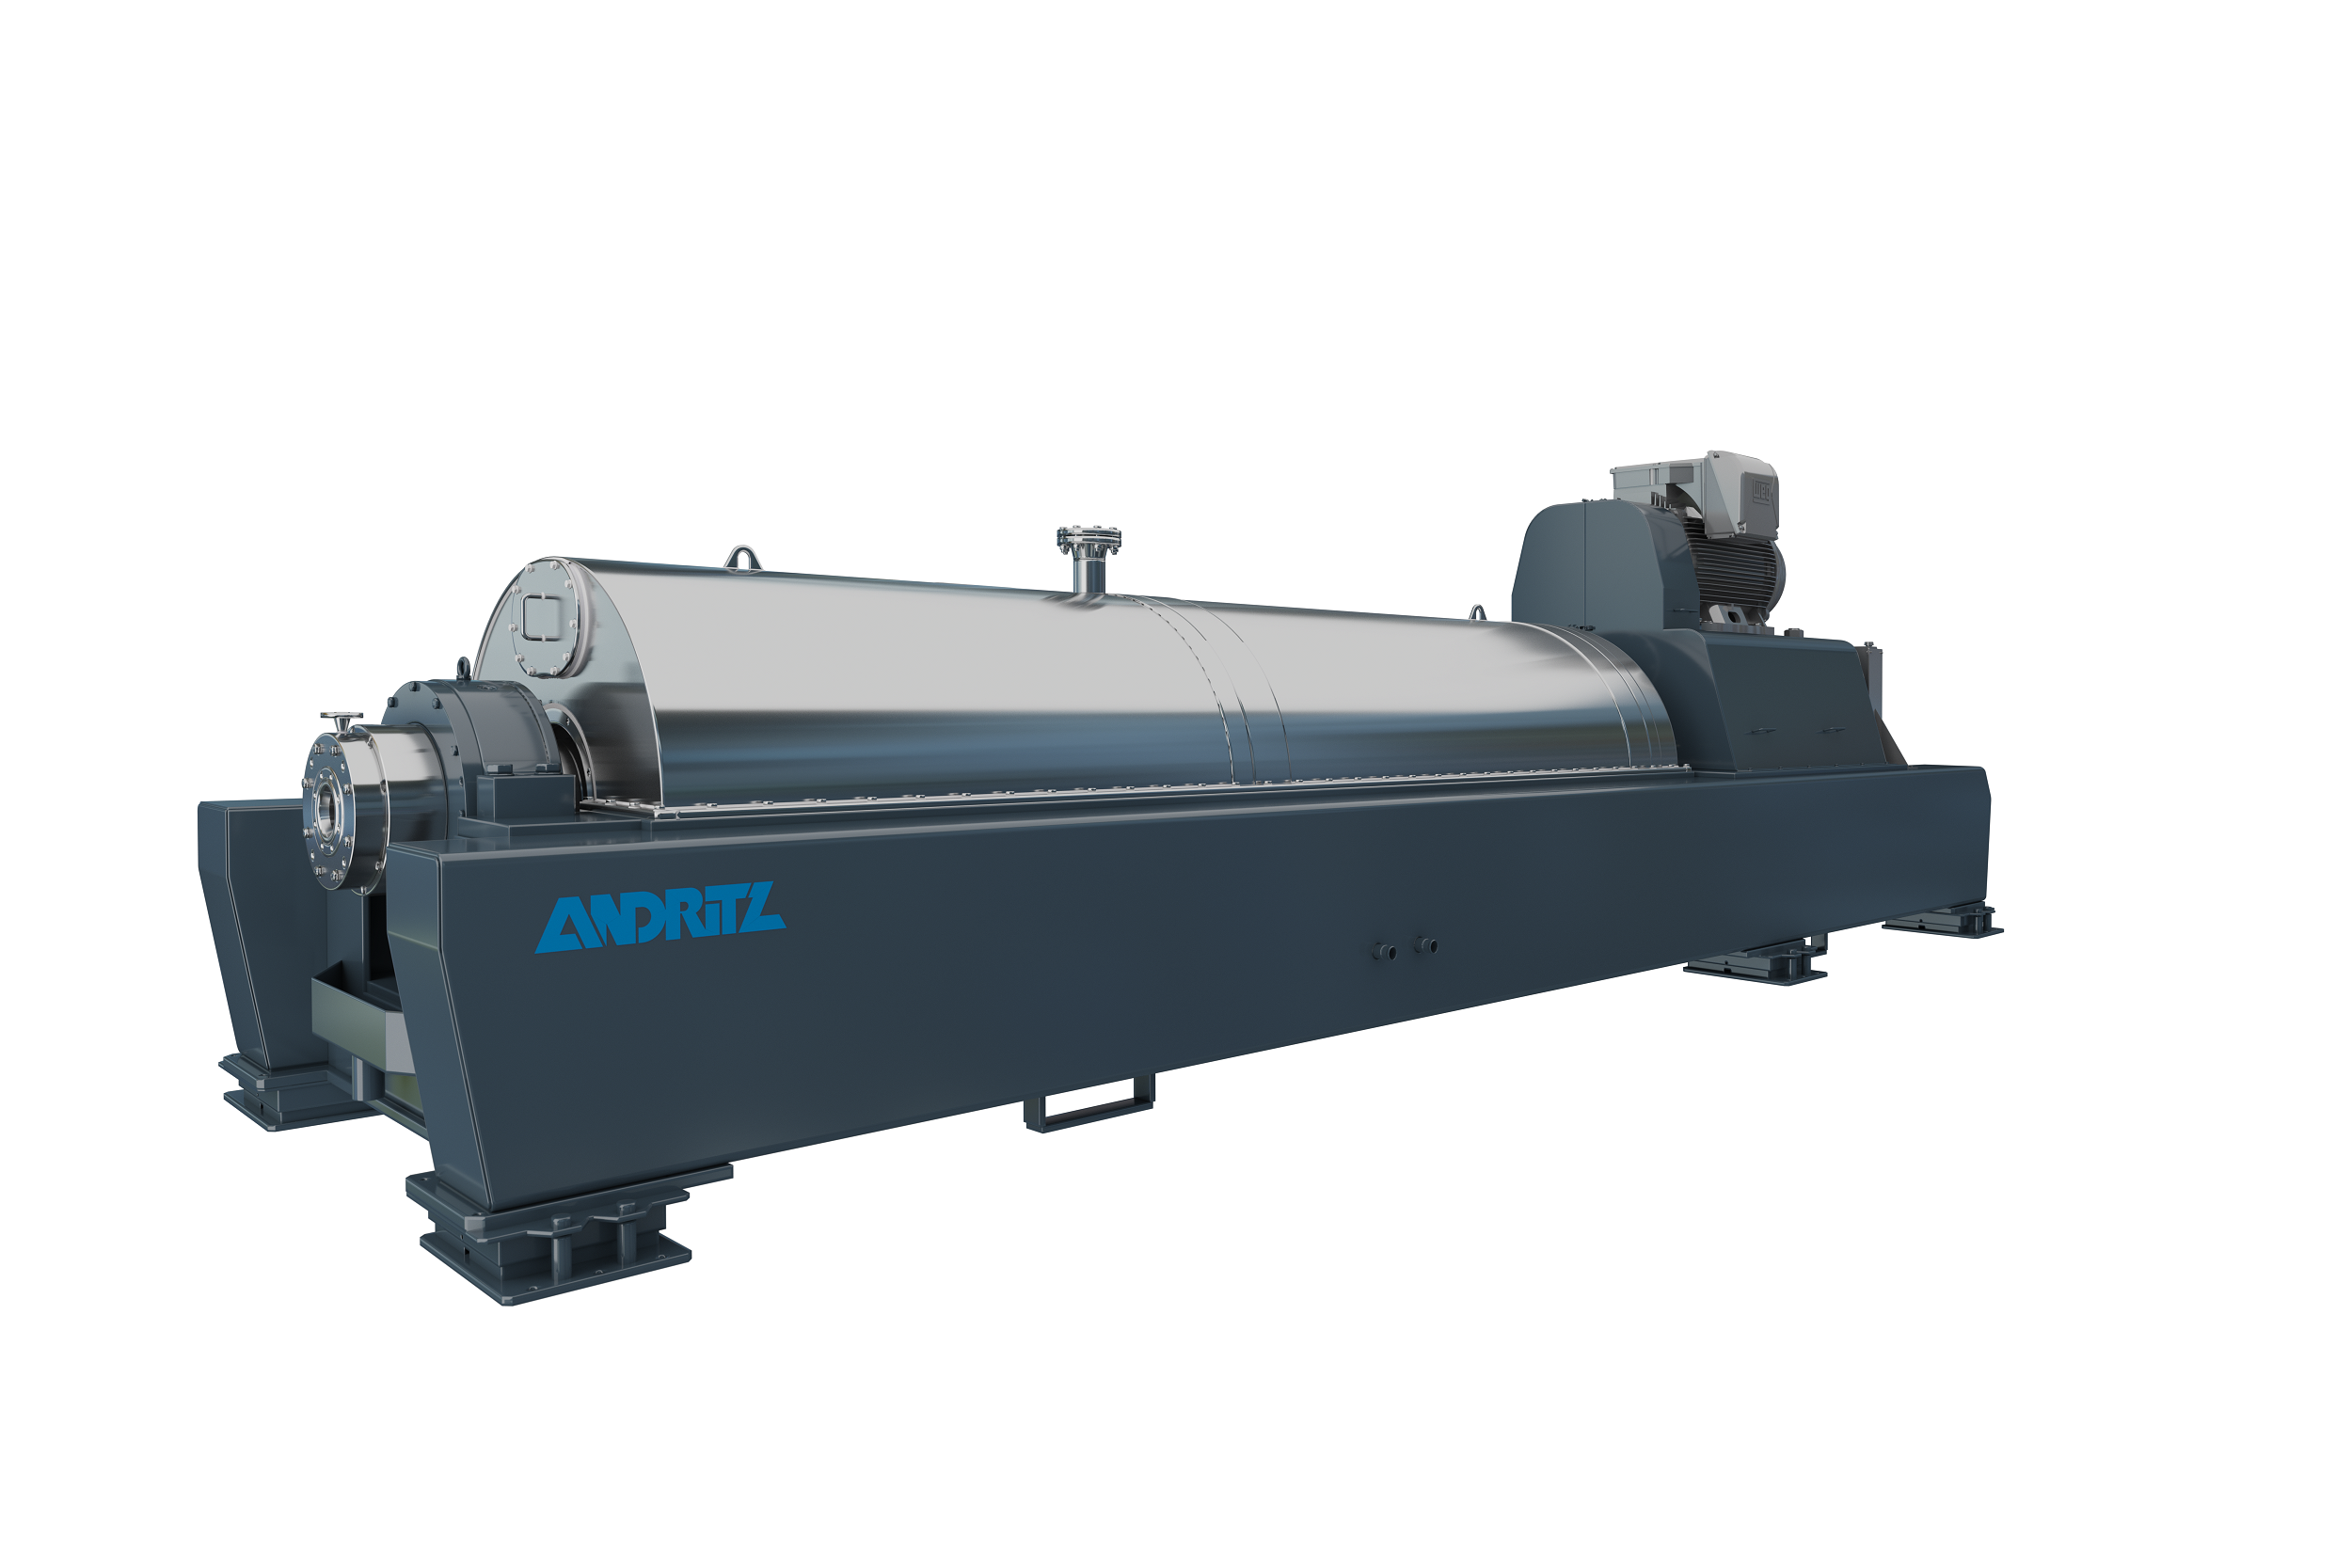 Andritz’s Decanter centrifuge A10-4 for tailings treatment will be launched at Exposibram